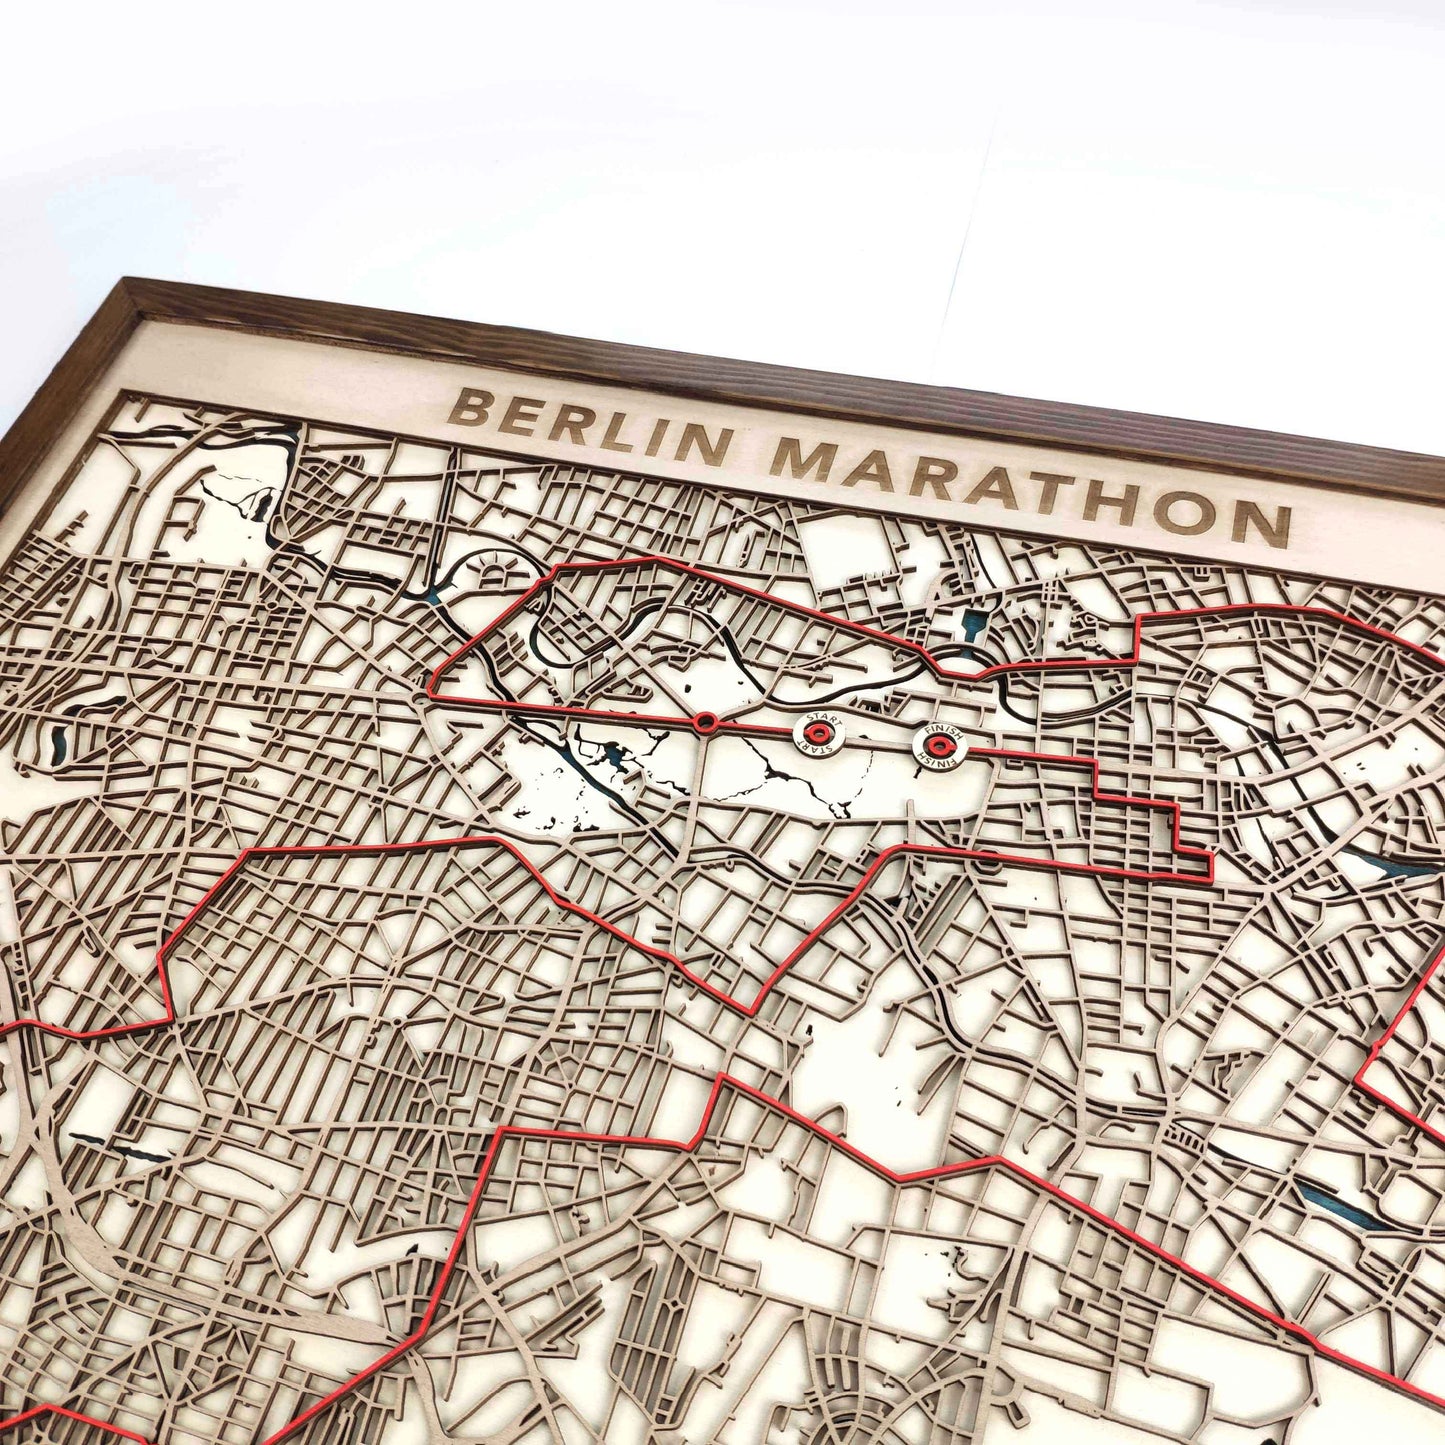 Berlin Marathon Commemorative Wooden Route Map – Collector's Item by CityWood - Custom Wood Map Art - Unique Laser Cut Engraved - Anniversary Gift